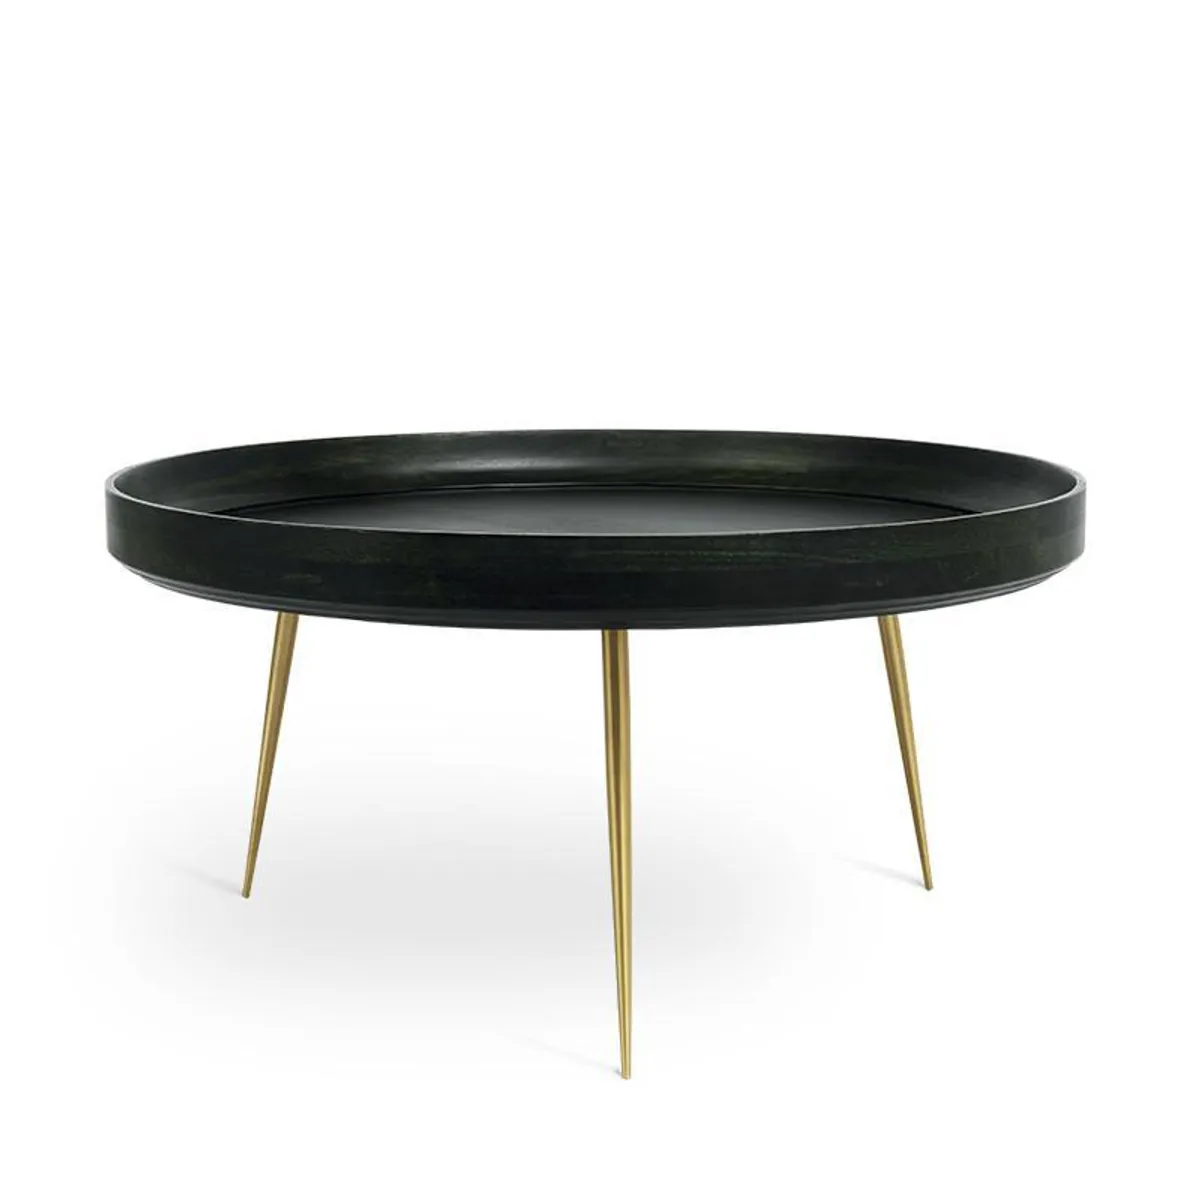 Bowl Table Brass And Green Bowl Large Table For Cafe Hotel And Healthcare By Inside Out Contracts